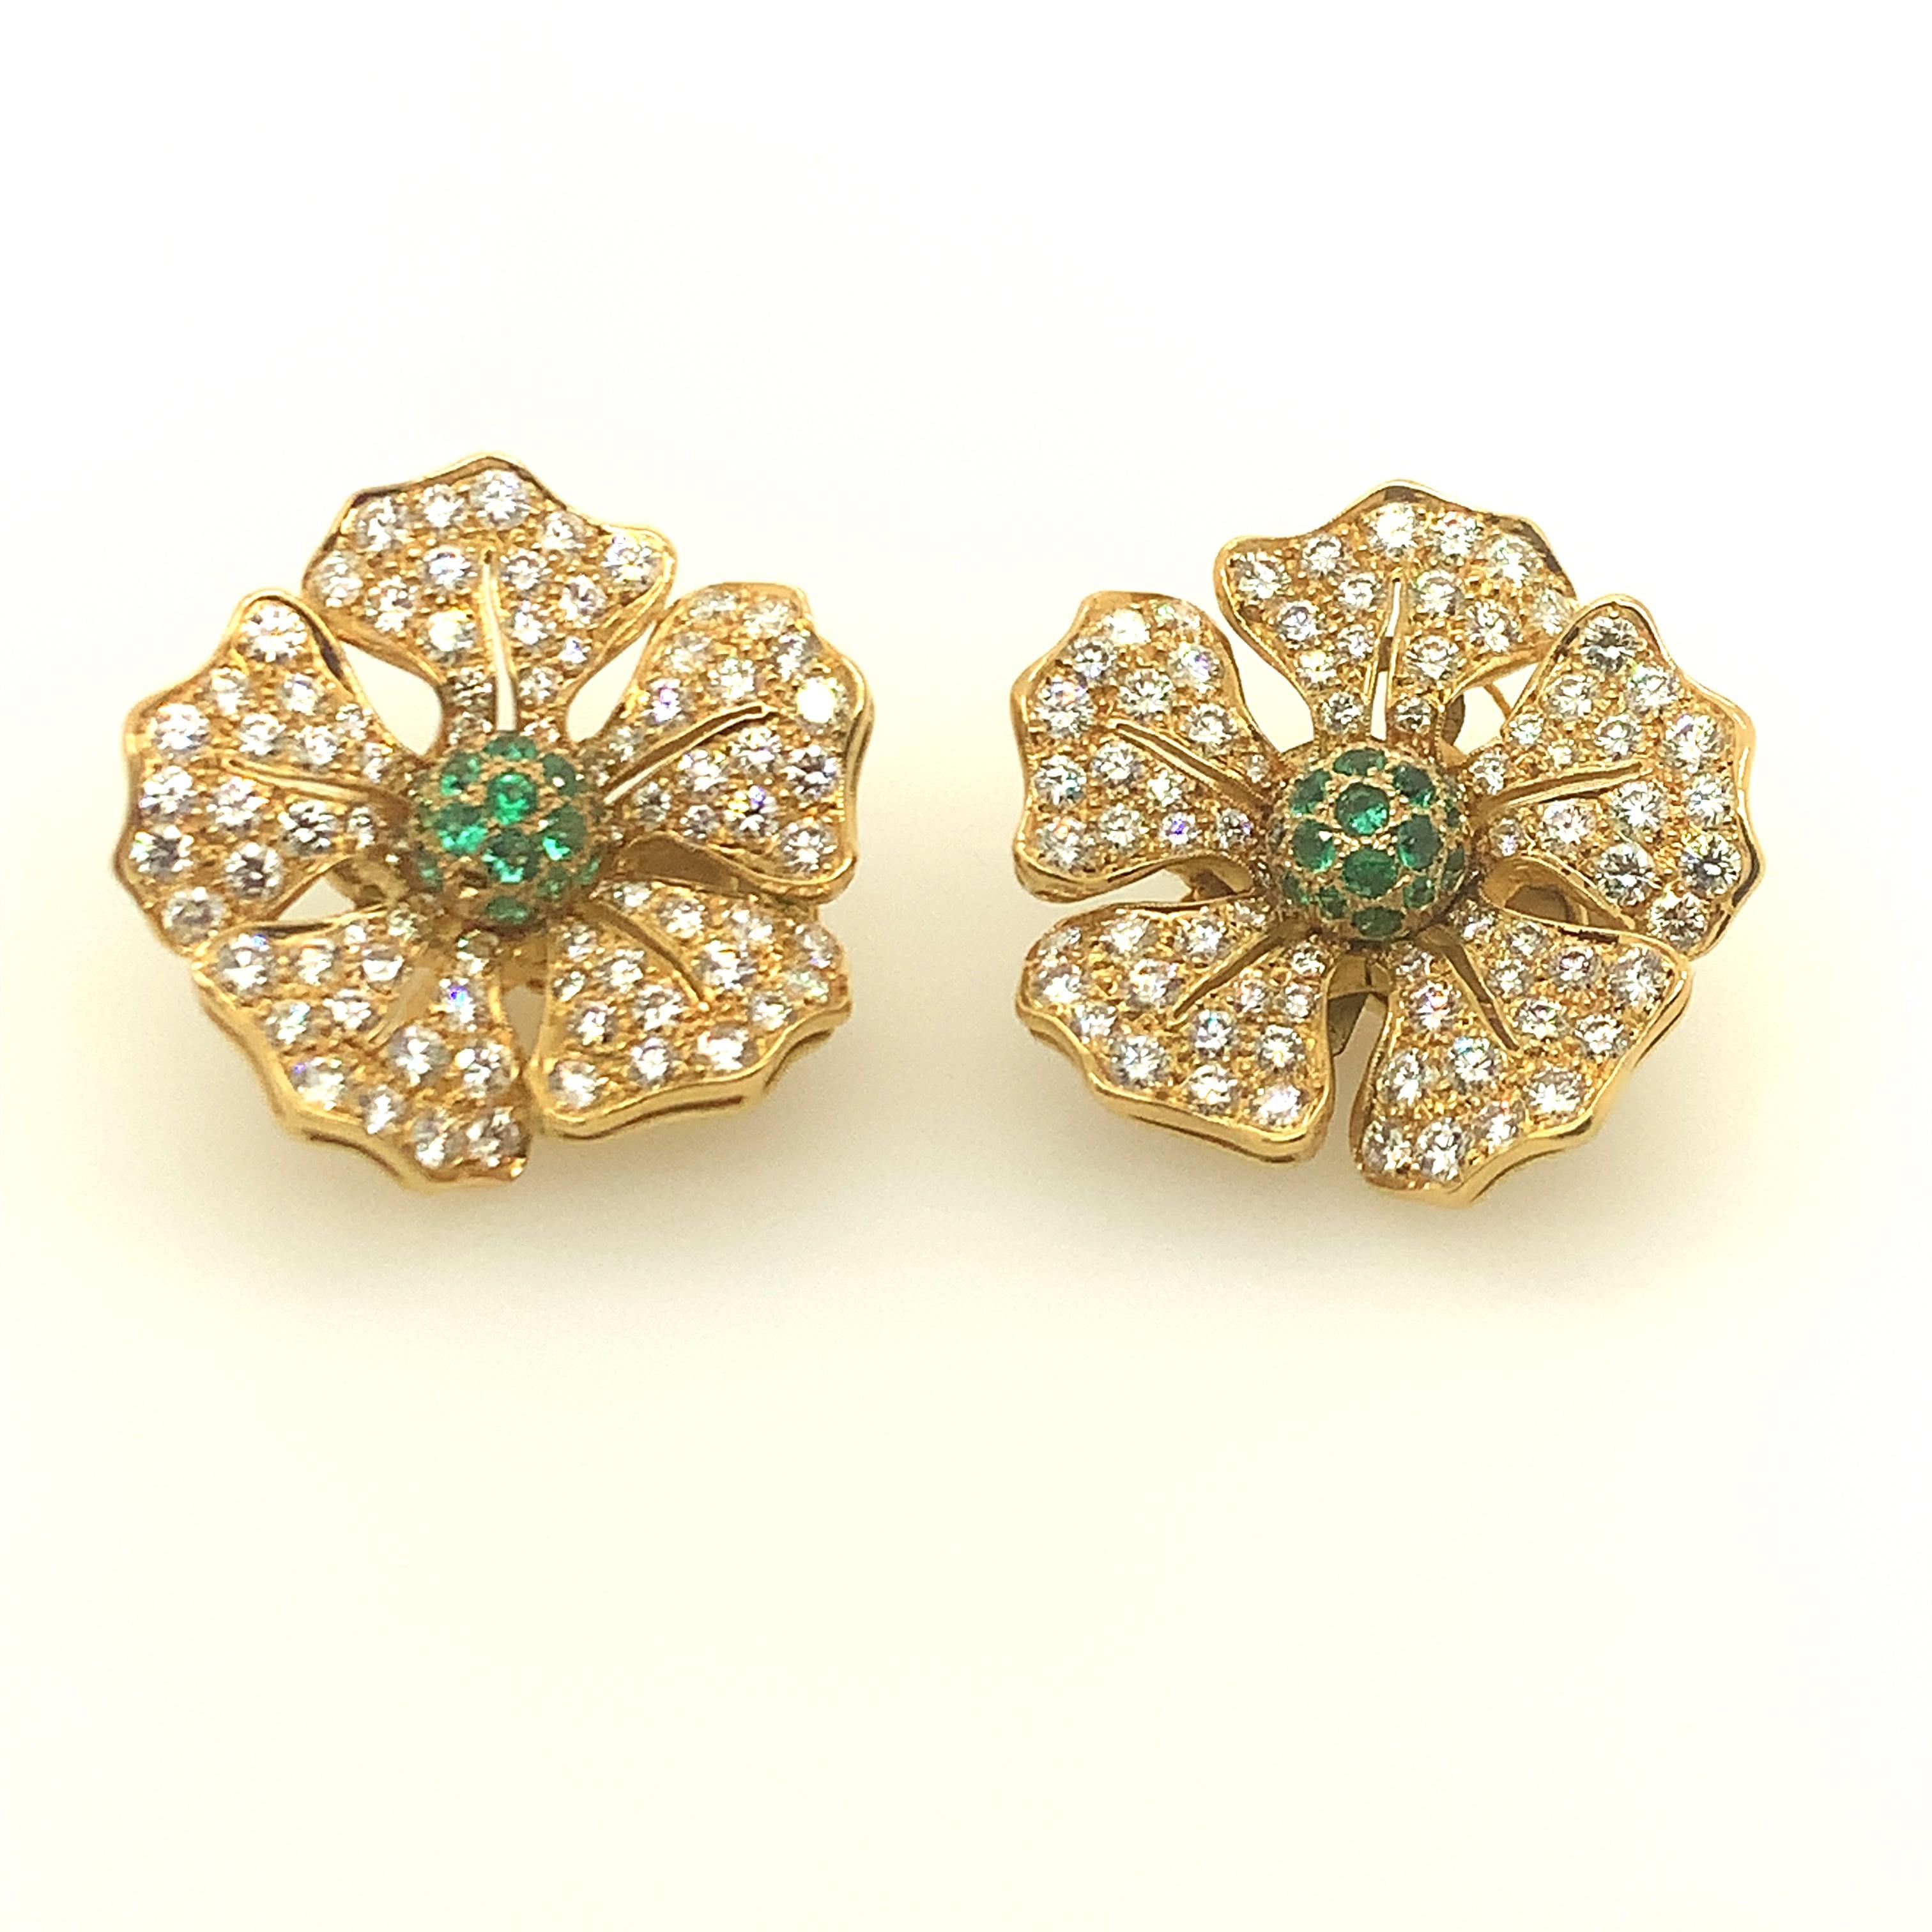 Extraordinary figural flower earrings comprised of brilliant cut diamonds and emeralds meticulously pave set in 18k. Most graceful feminine shape. Approximately 5 cts. of diamonds, .50cts. of vibrant emeralds.  Omega backs, posts can be added